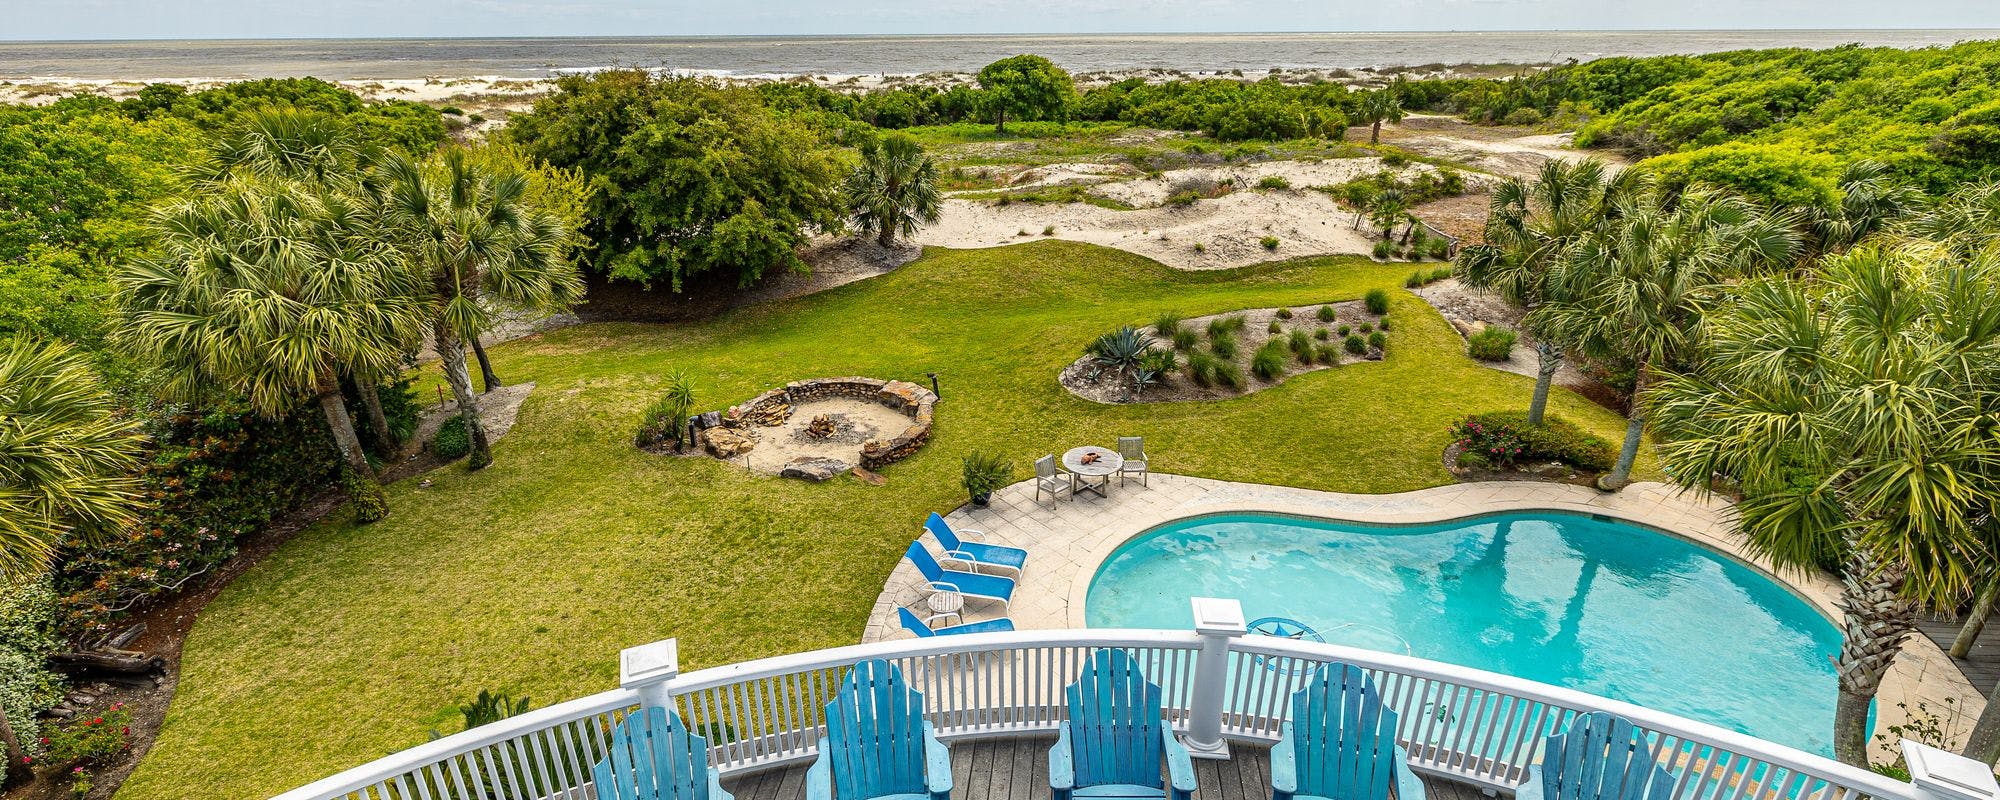 Oceanfront vacation rental home with private pool in St. Simons Island